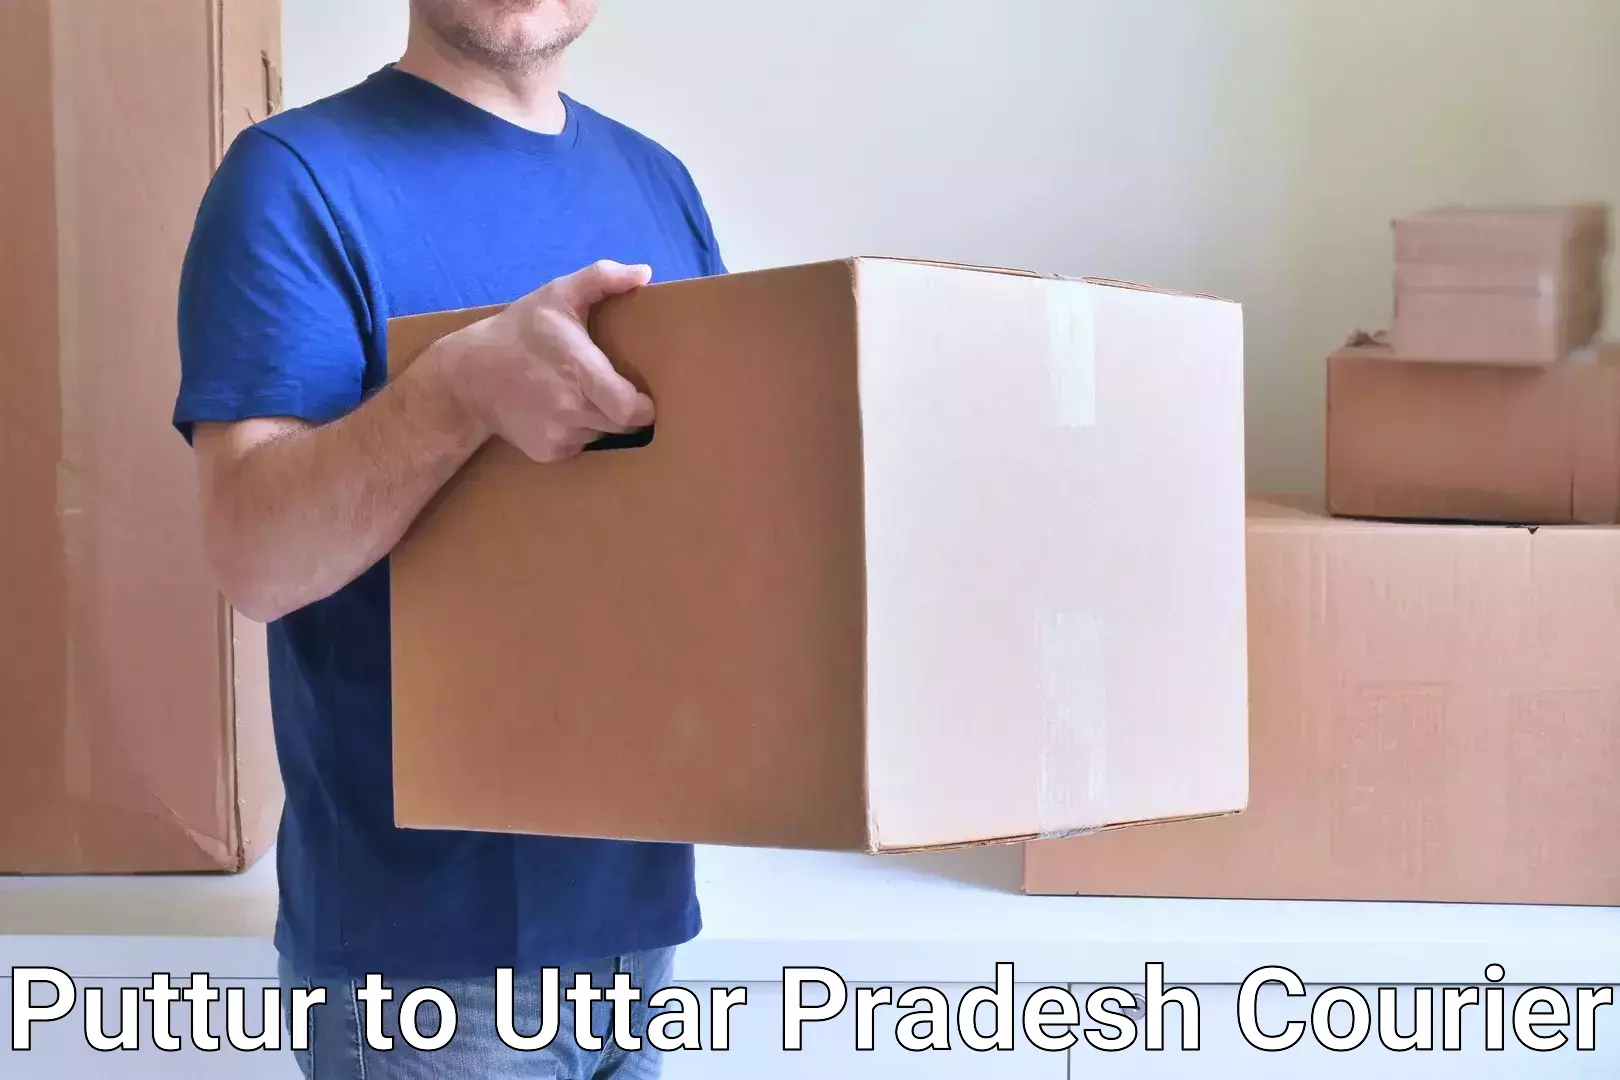 Courier services in Puttur to Nichlaul